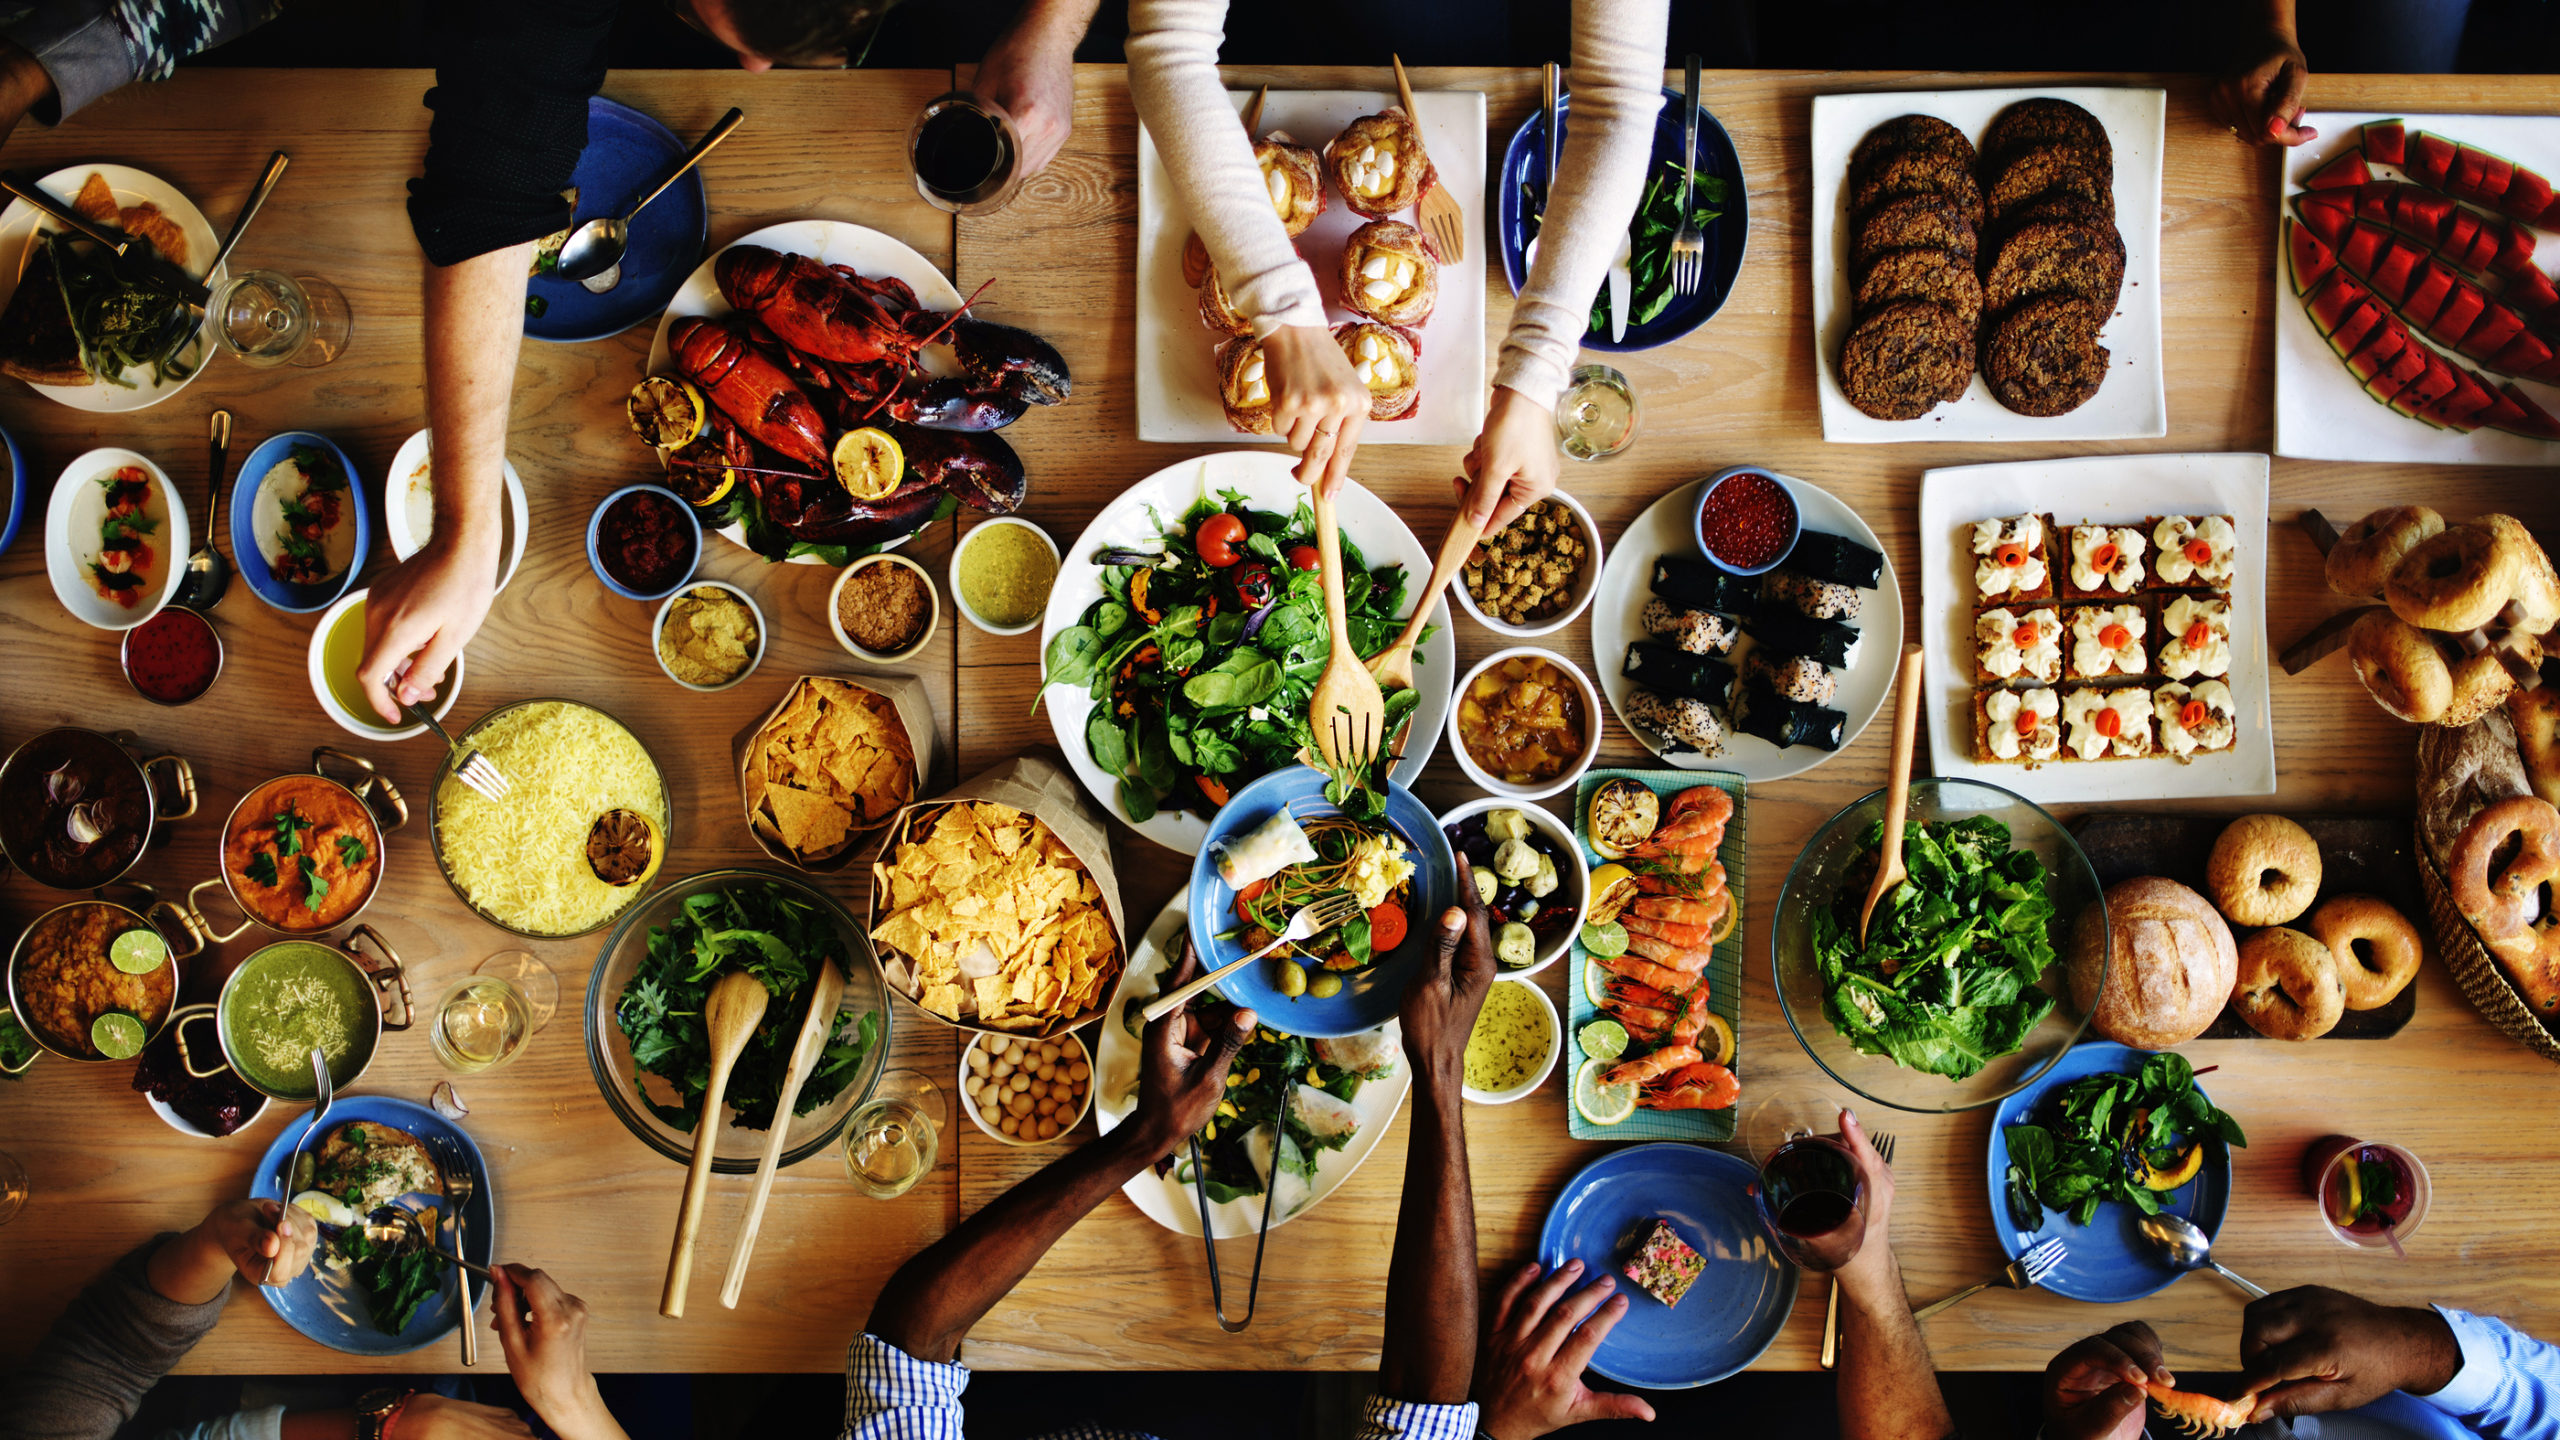 Improve eating habits by sharing meals with family members